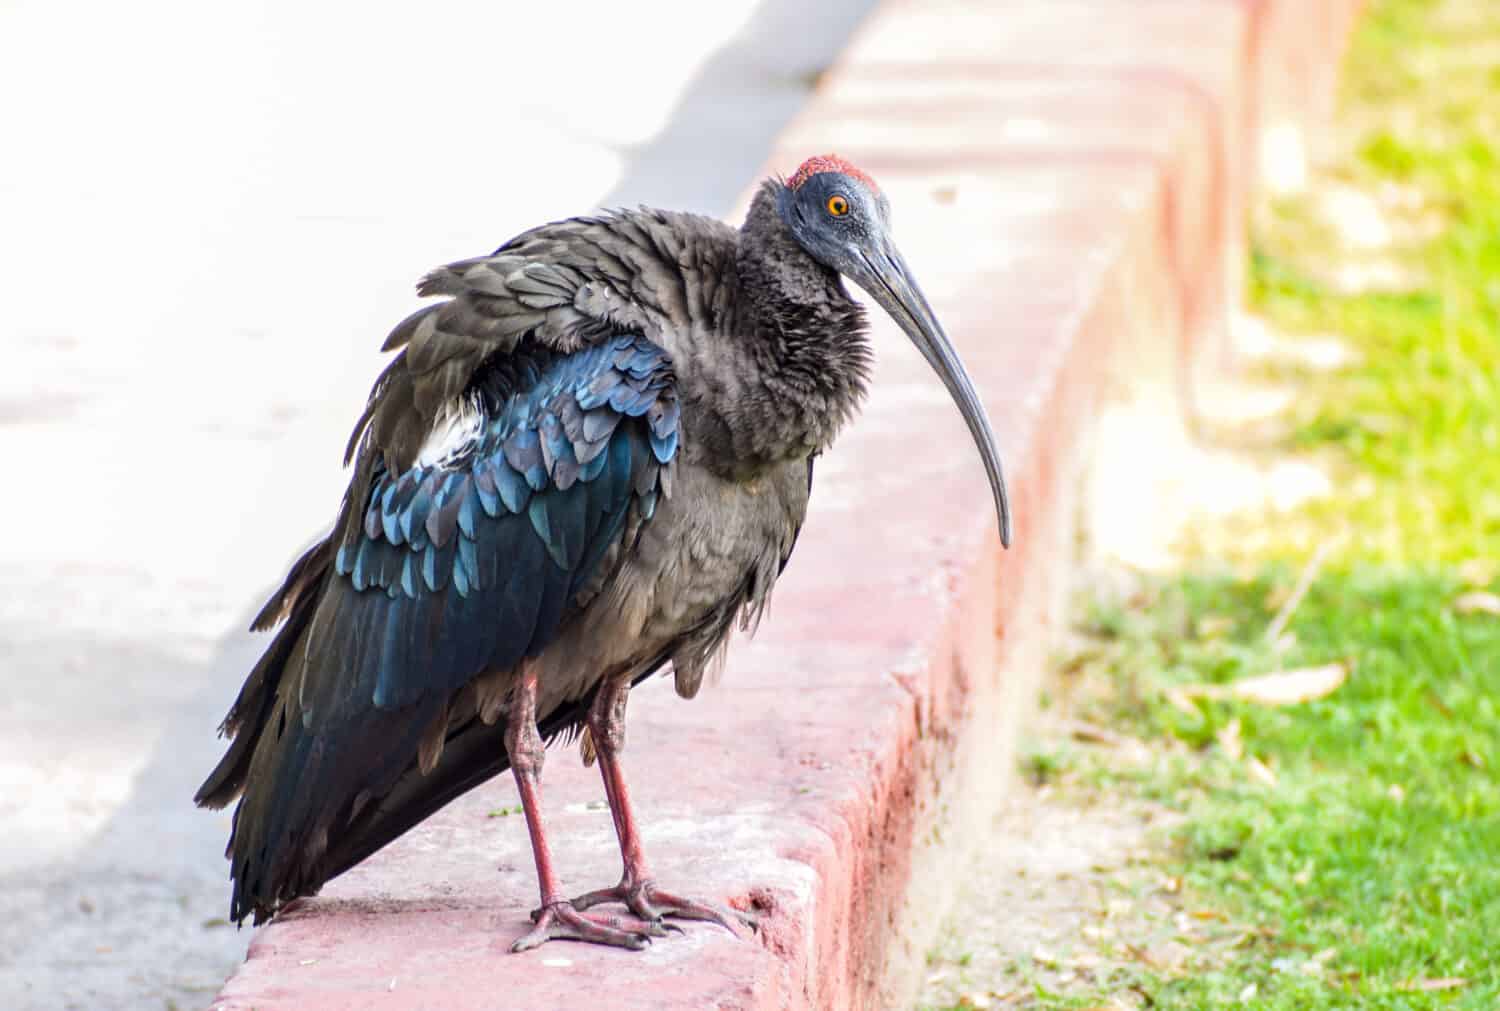 The giant ibis (Thaumatibis gigantea), the only species in the monotypic genus Thaumatibis, is a wading bird of the ibis family.